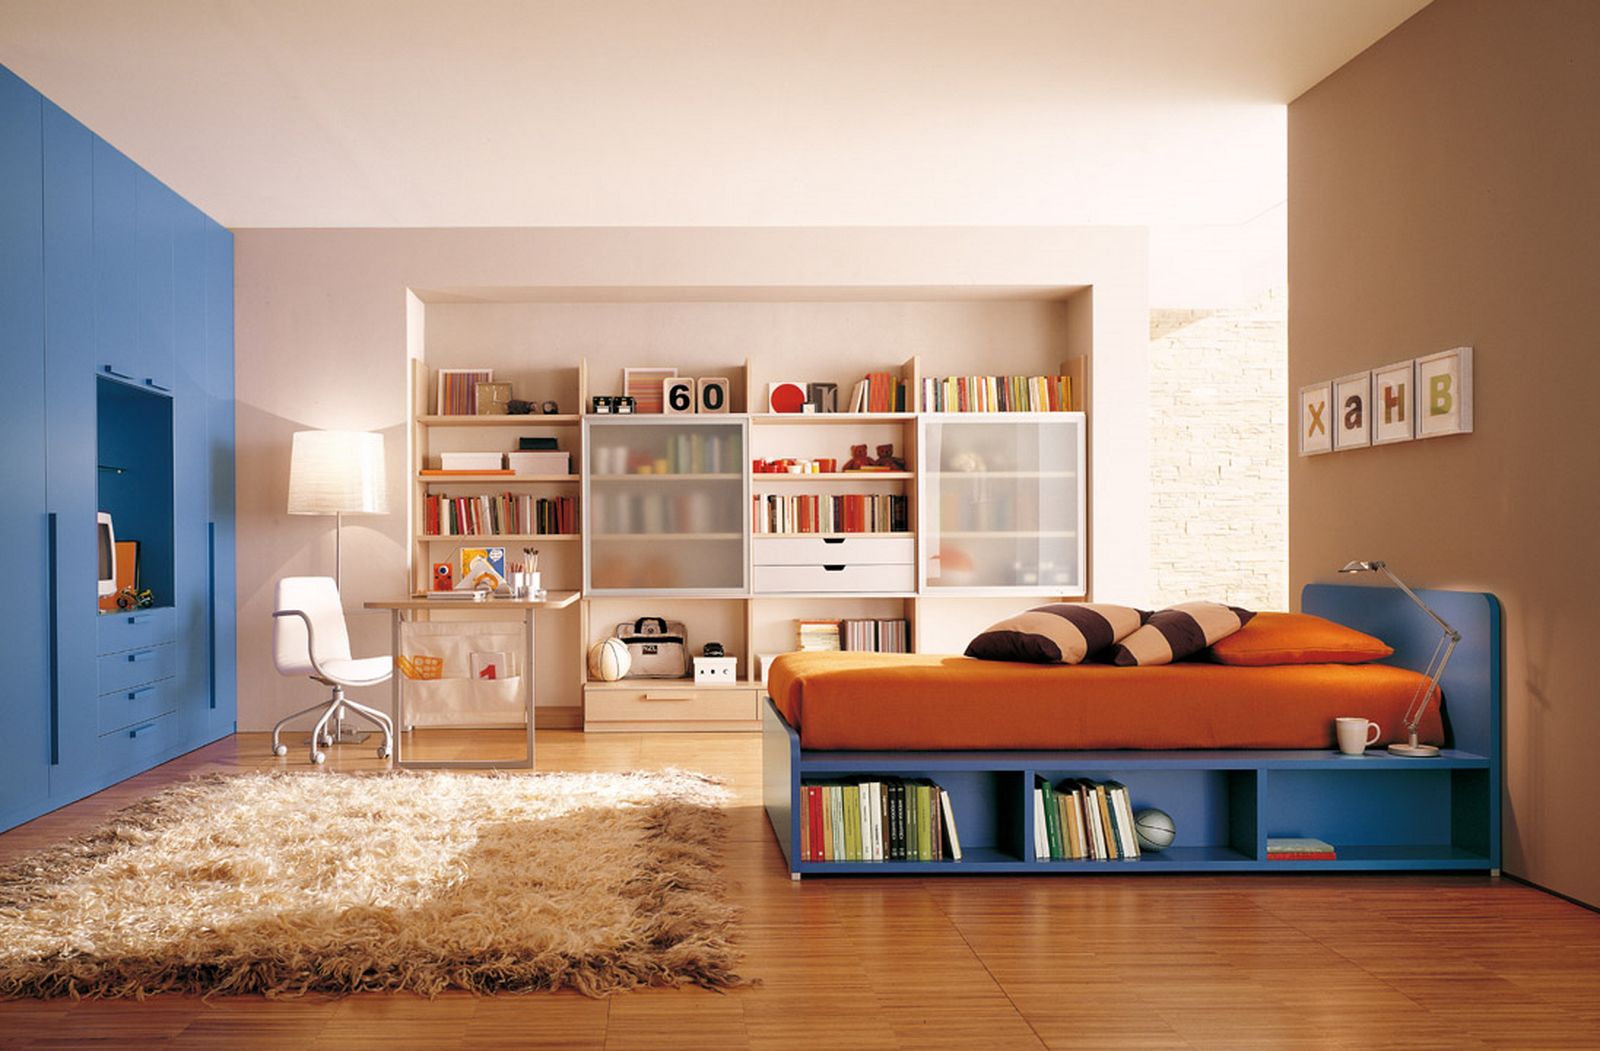 Boys Room With Amazing Boys Room Paint Ideas With Orange Bed On Blue Platform Furnished With White Soft Rug And Completed With White Bookcase Shelving Kids Room Boys Room Paint Ideas With Simple Design